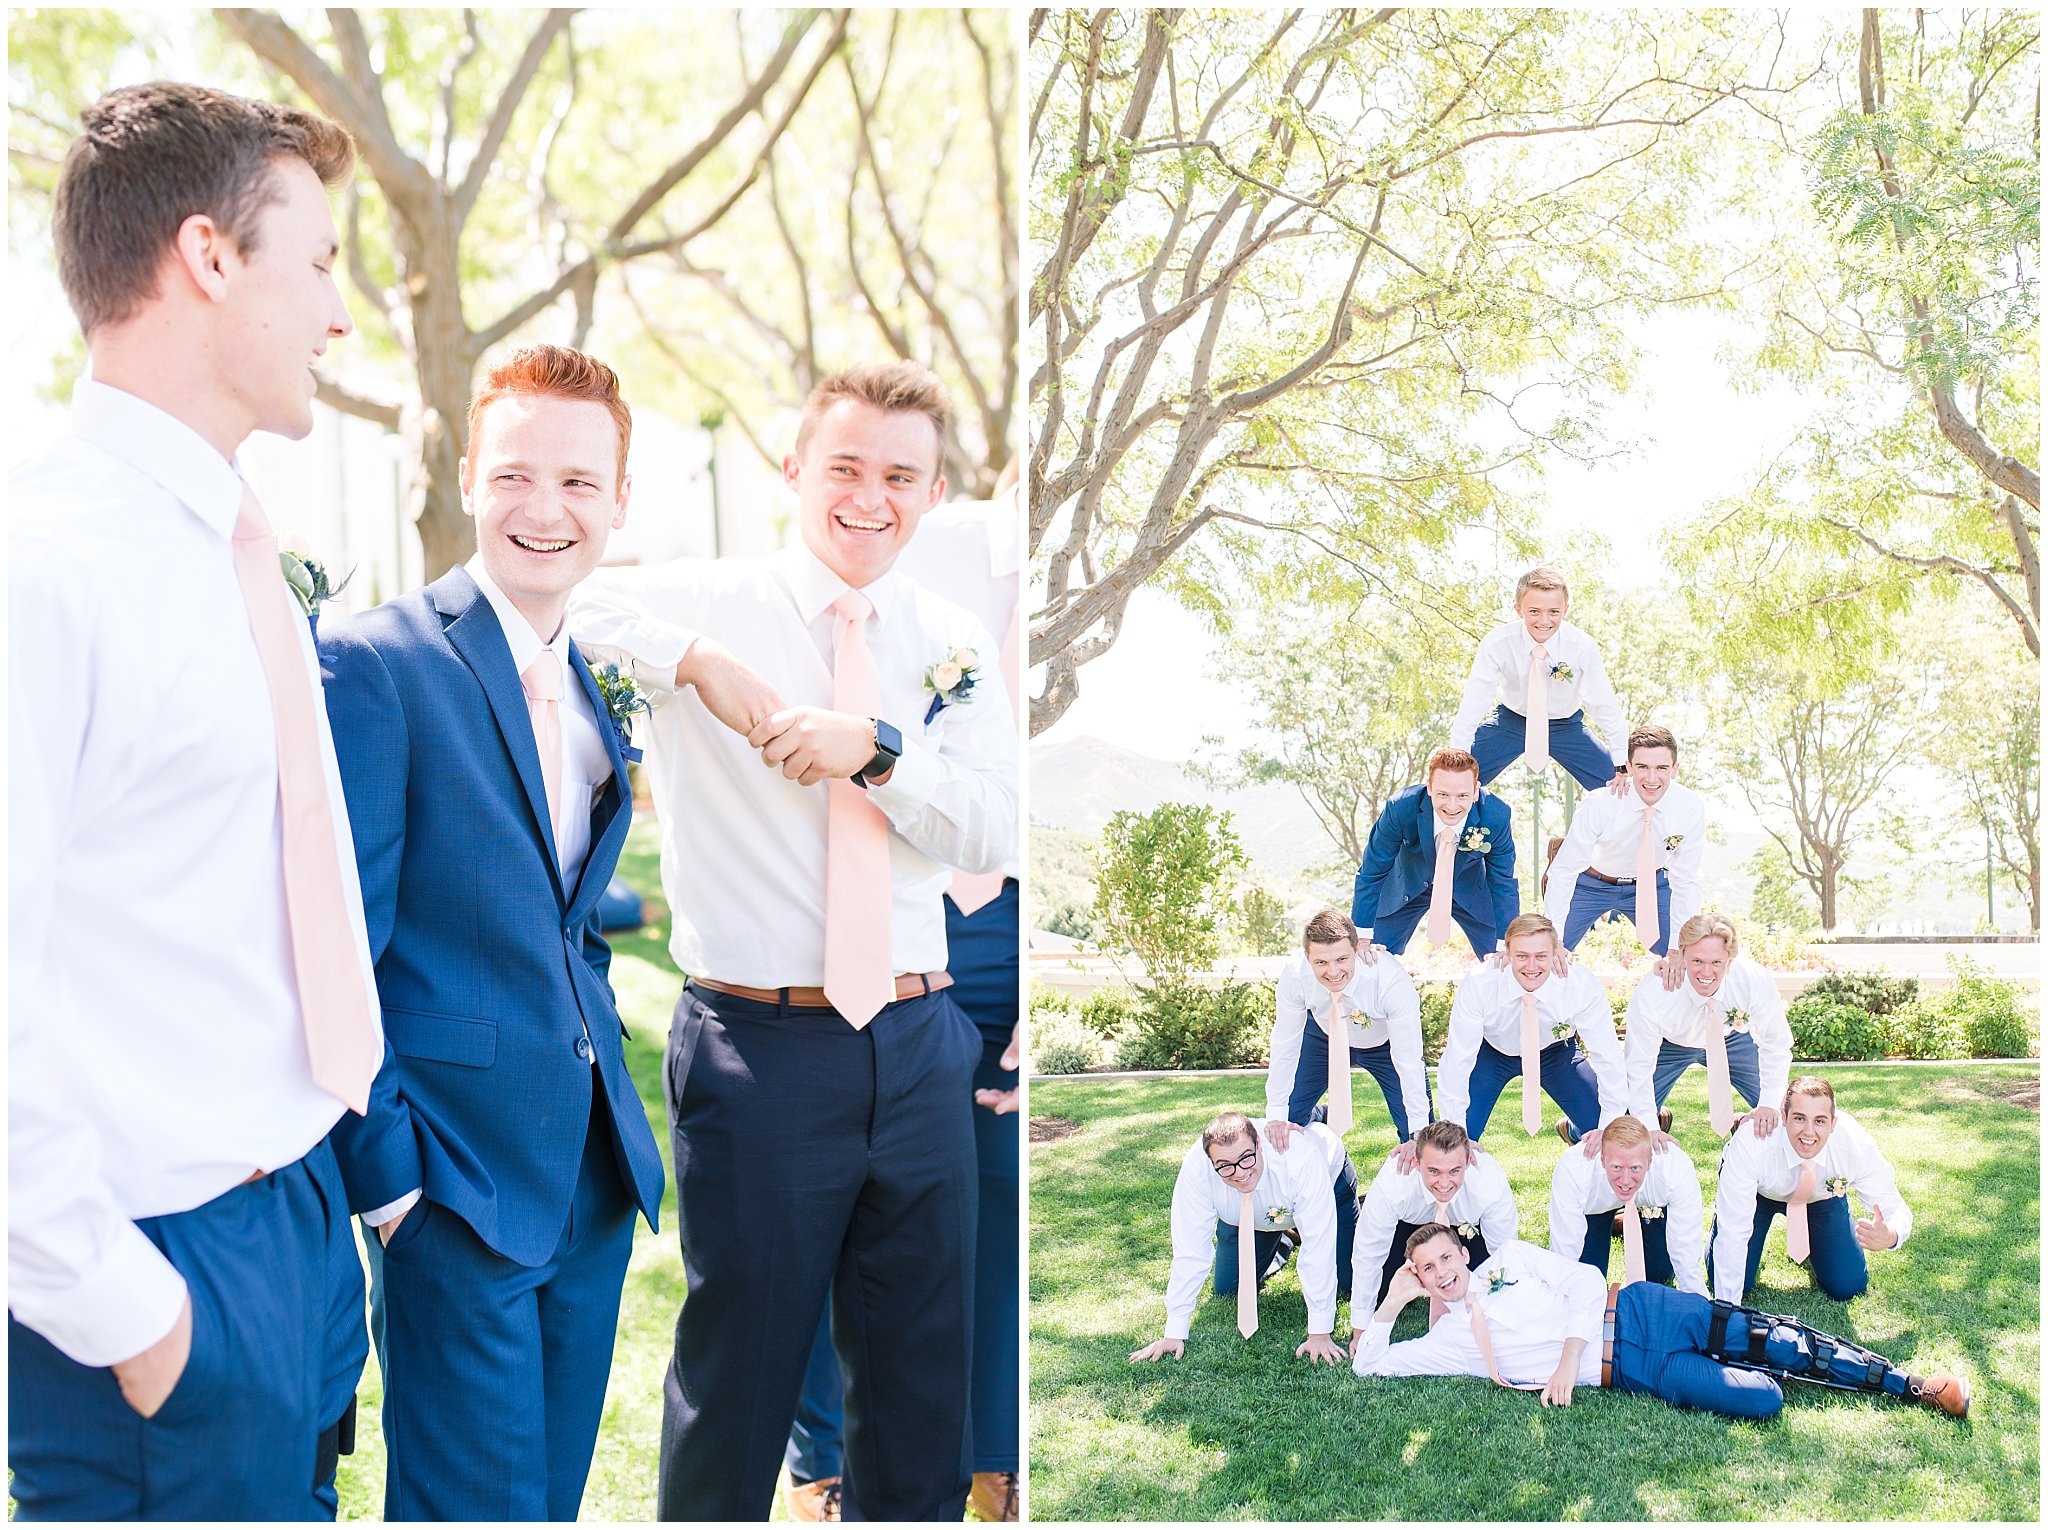 Groom with groomsmen wearing blush ties | Bountiful Temple Wedding and Oak Hills Reception | Jessie and Dallin Photography